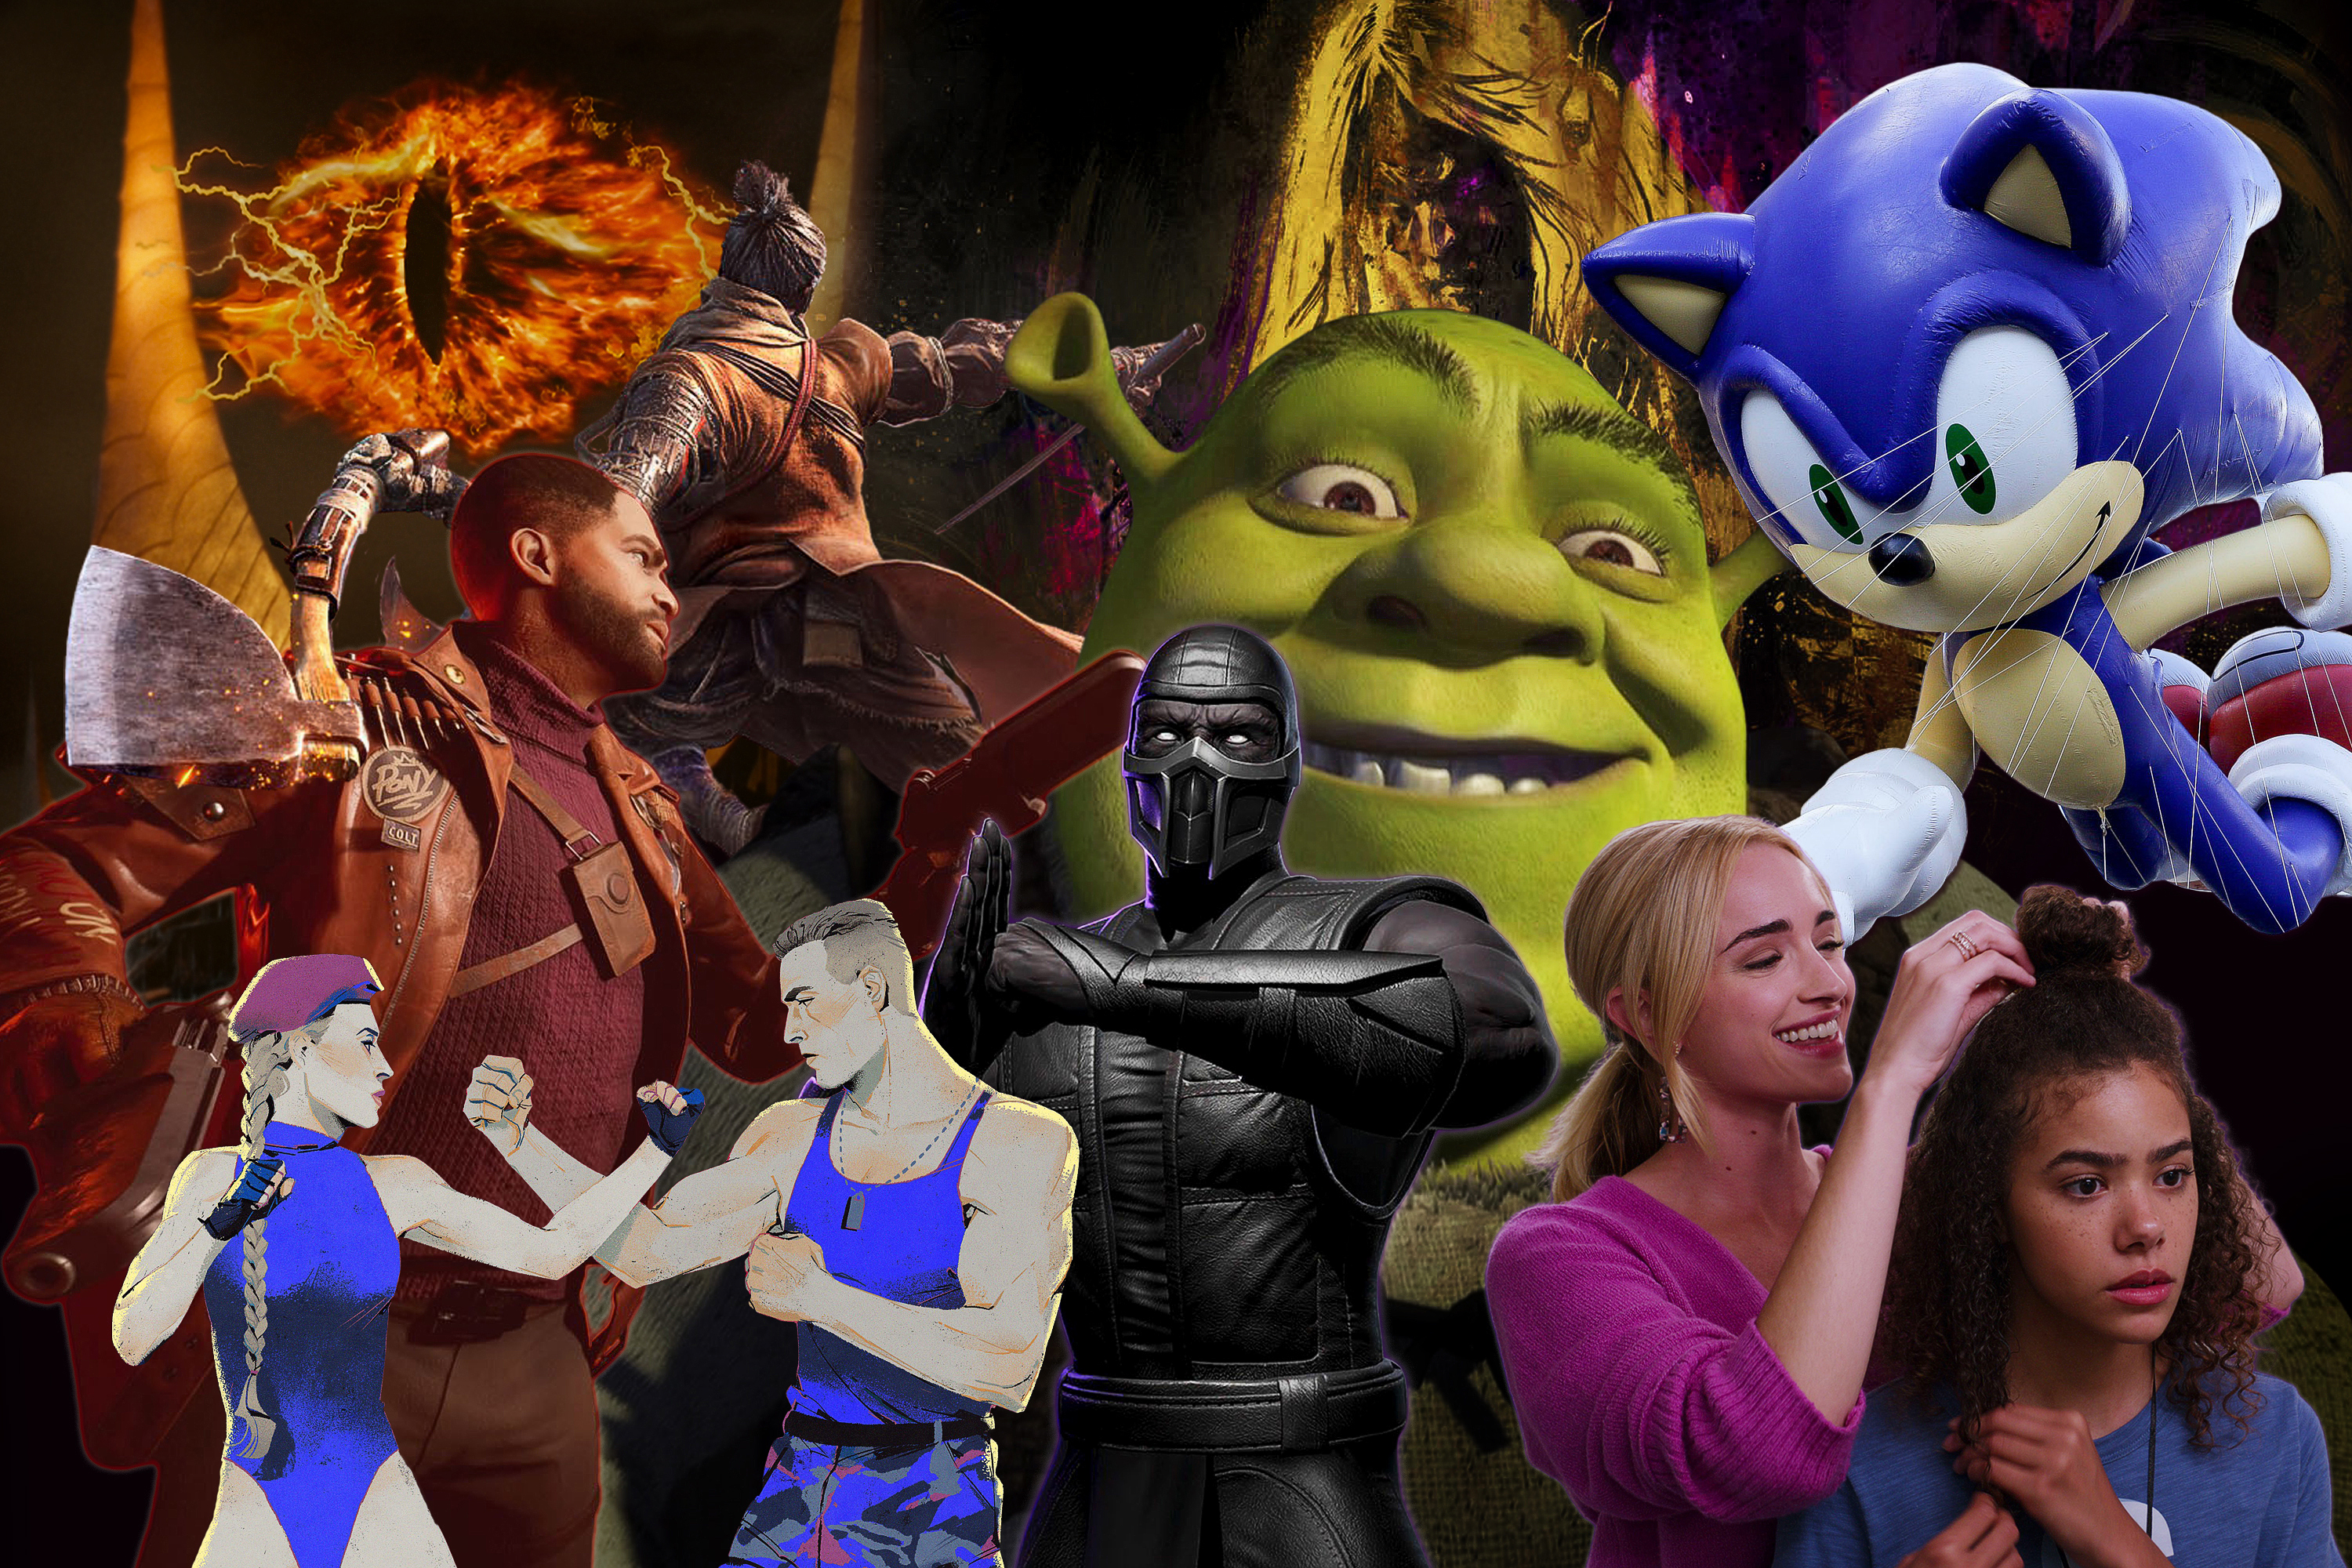 collage featuring images from games and TV shows